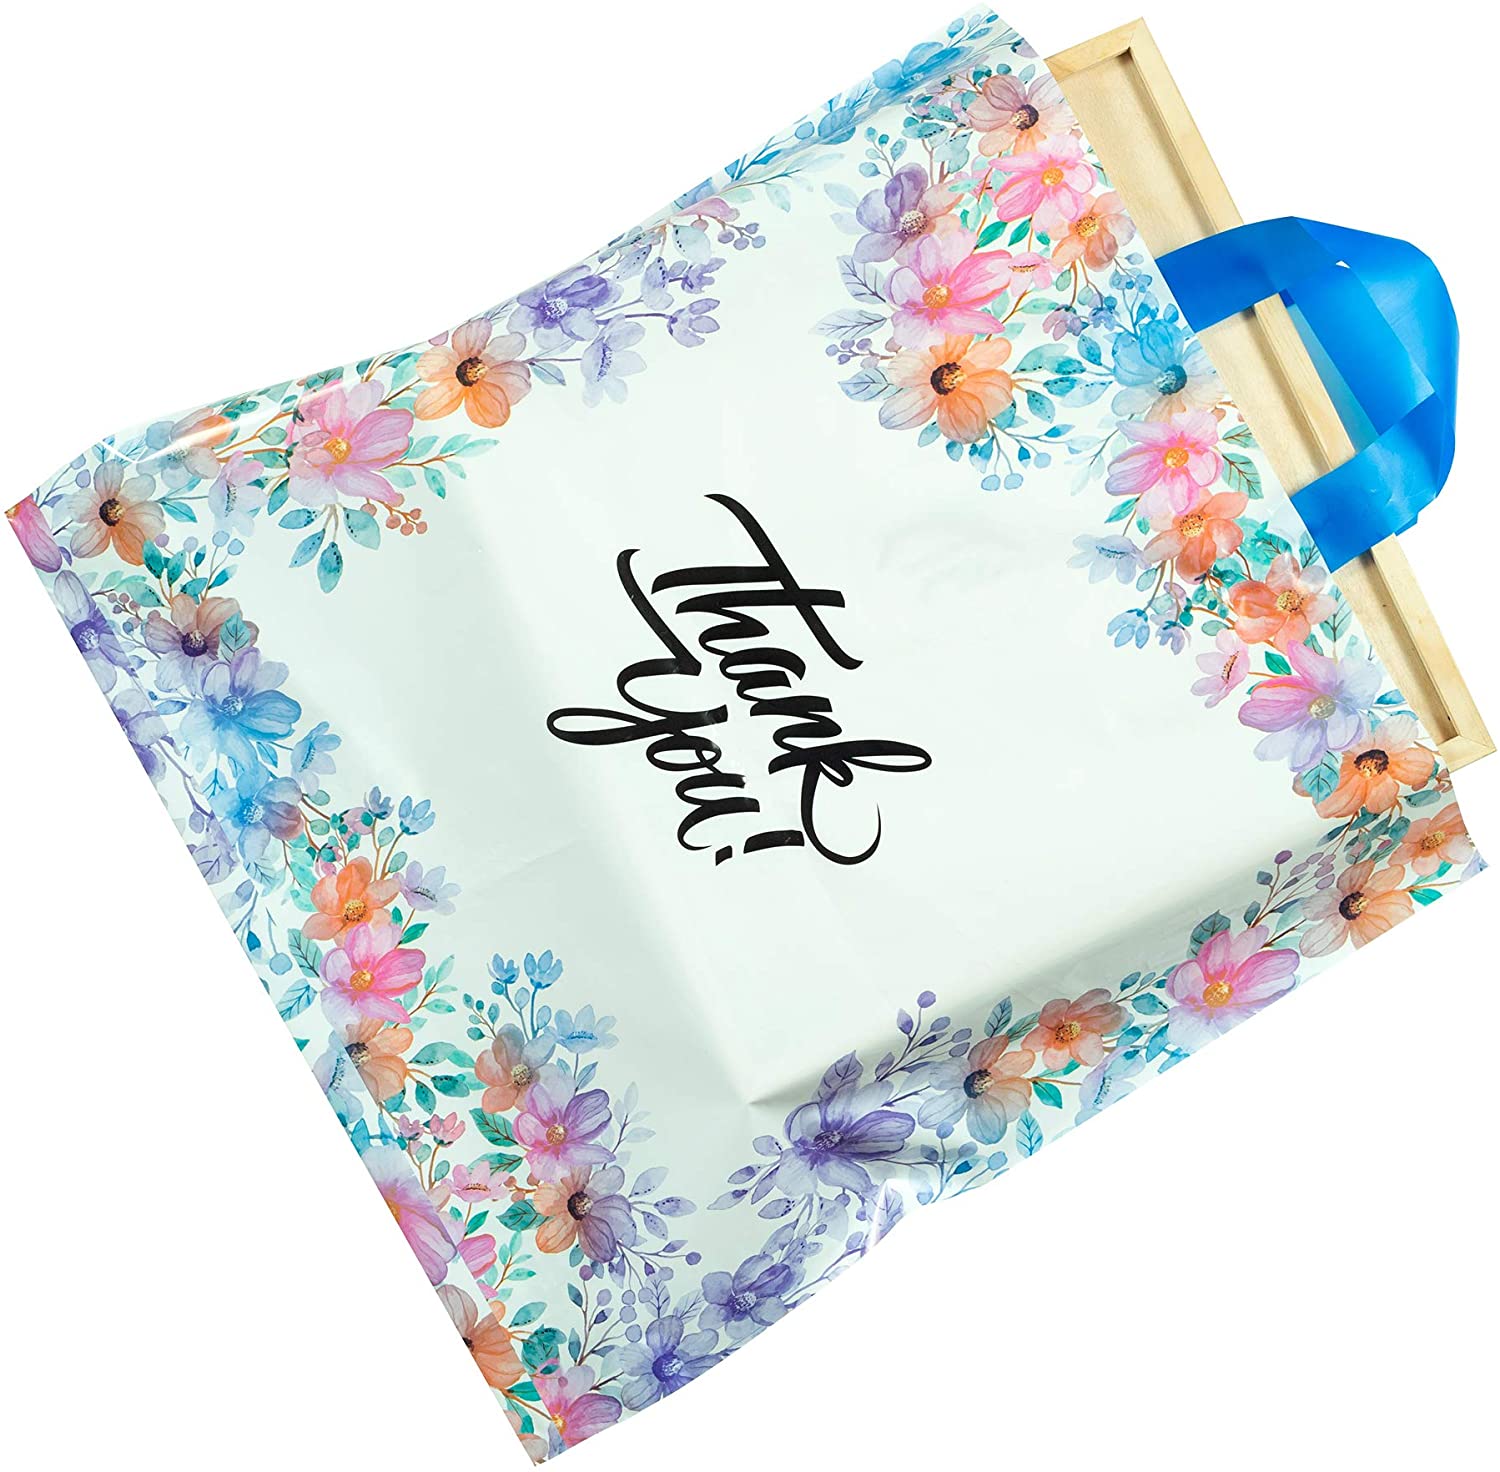 18 x 18 floral pattern thank you bag with object inside